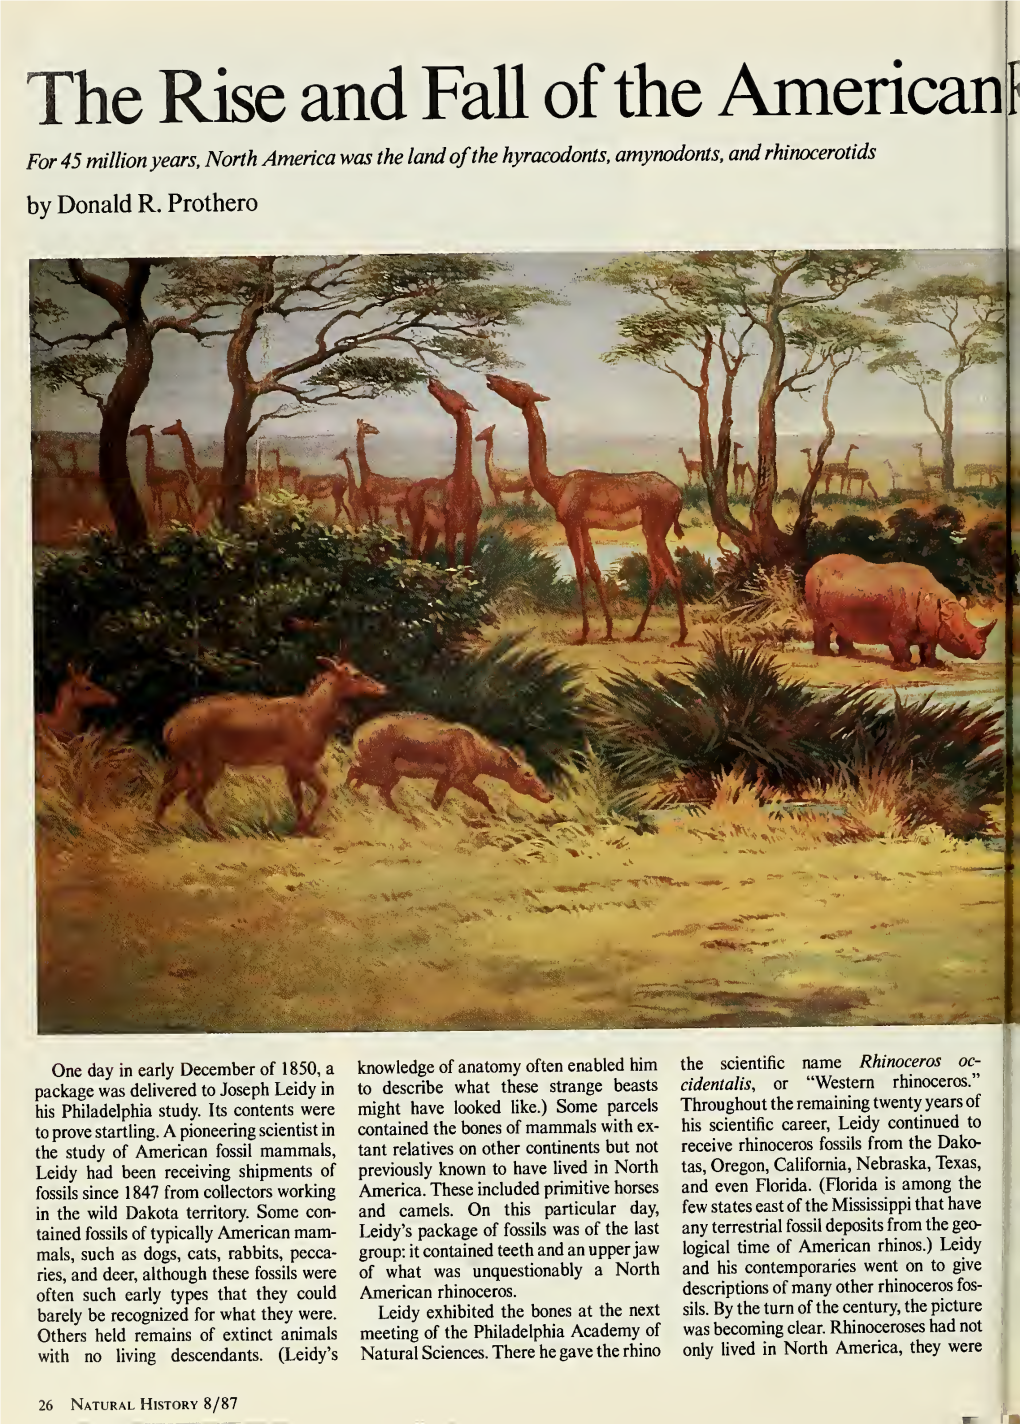 Natural History 8/87 Rhino the Plains Ofwestern Nebraska in the Late Miocene Hosted Great Congregations of Mammals